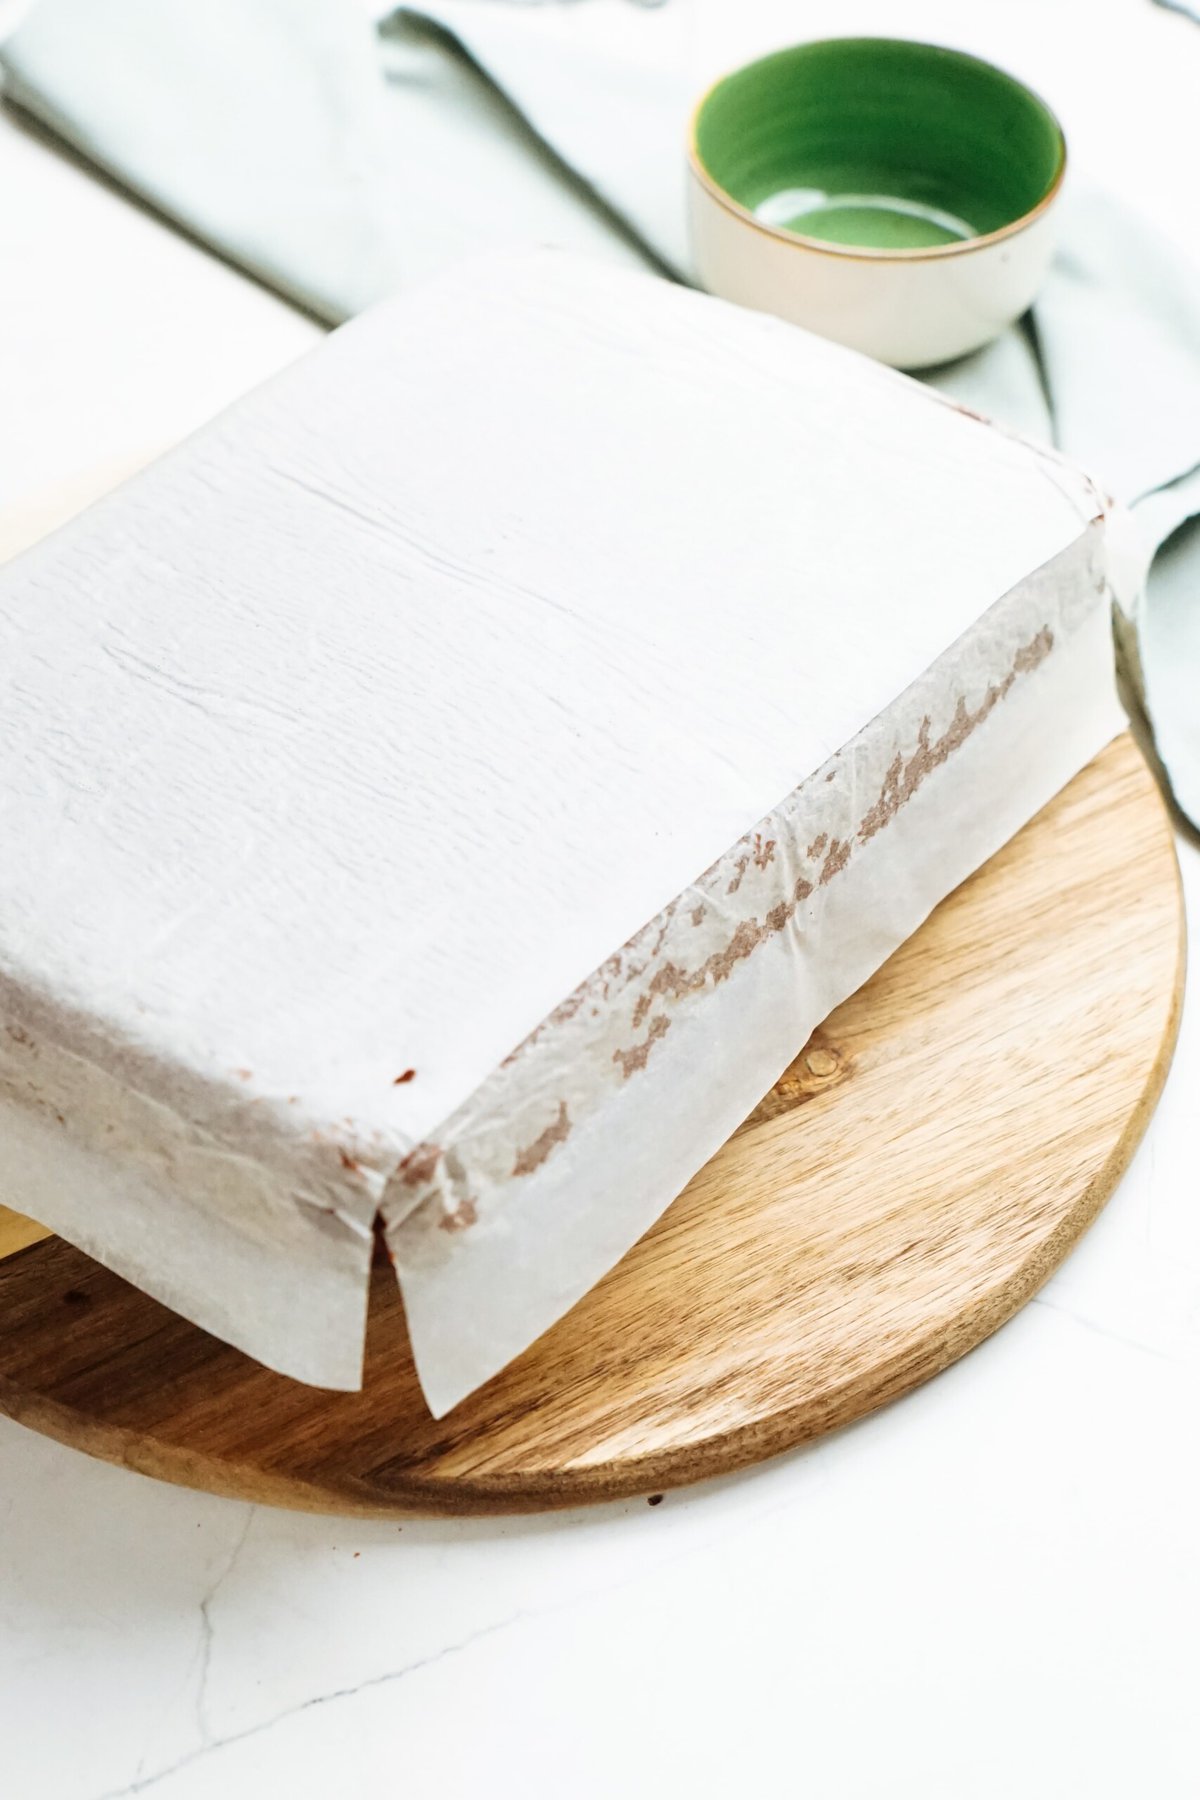 An inverted cake sitting on a wooden cutting board.